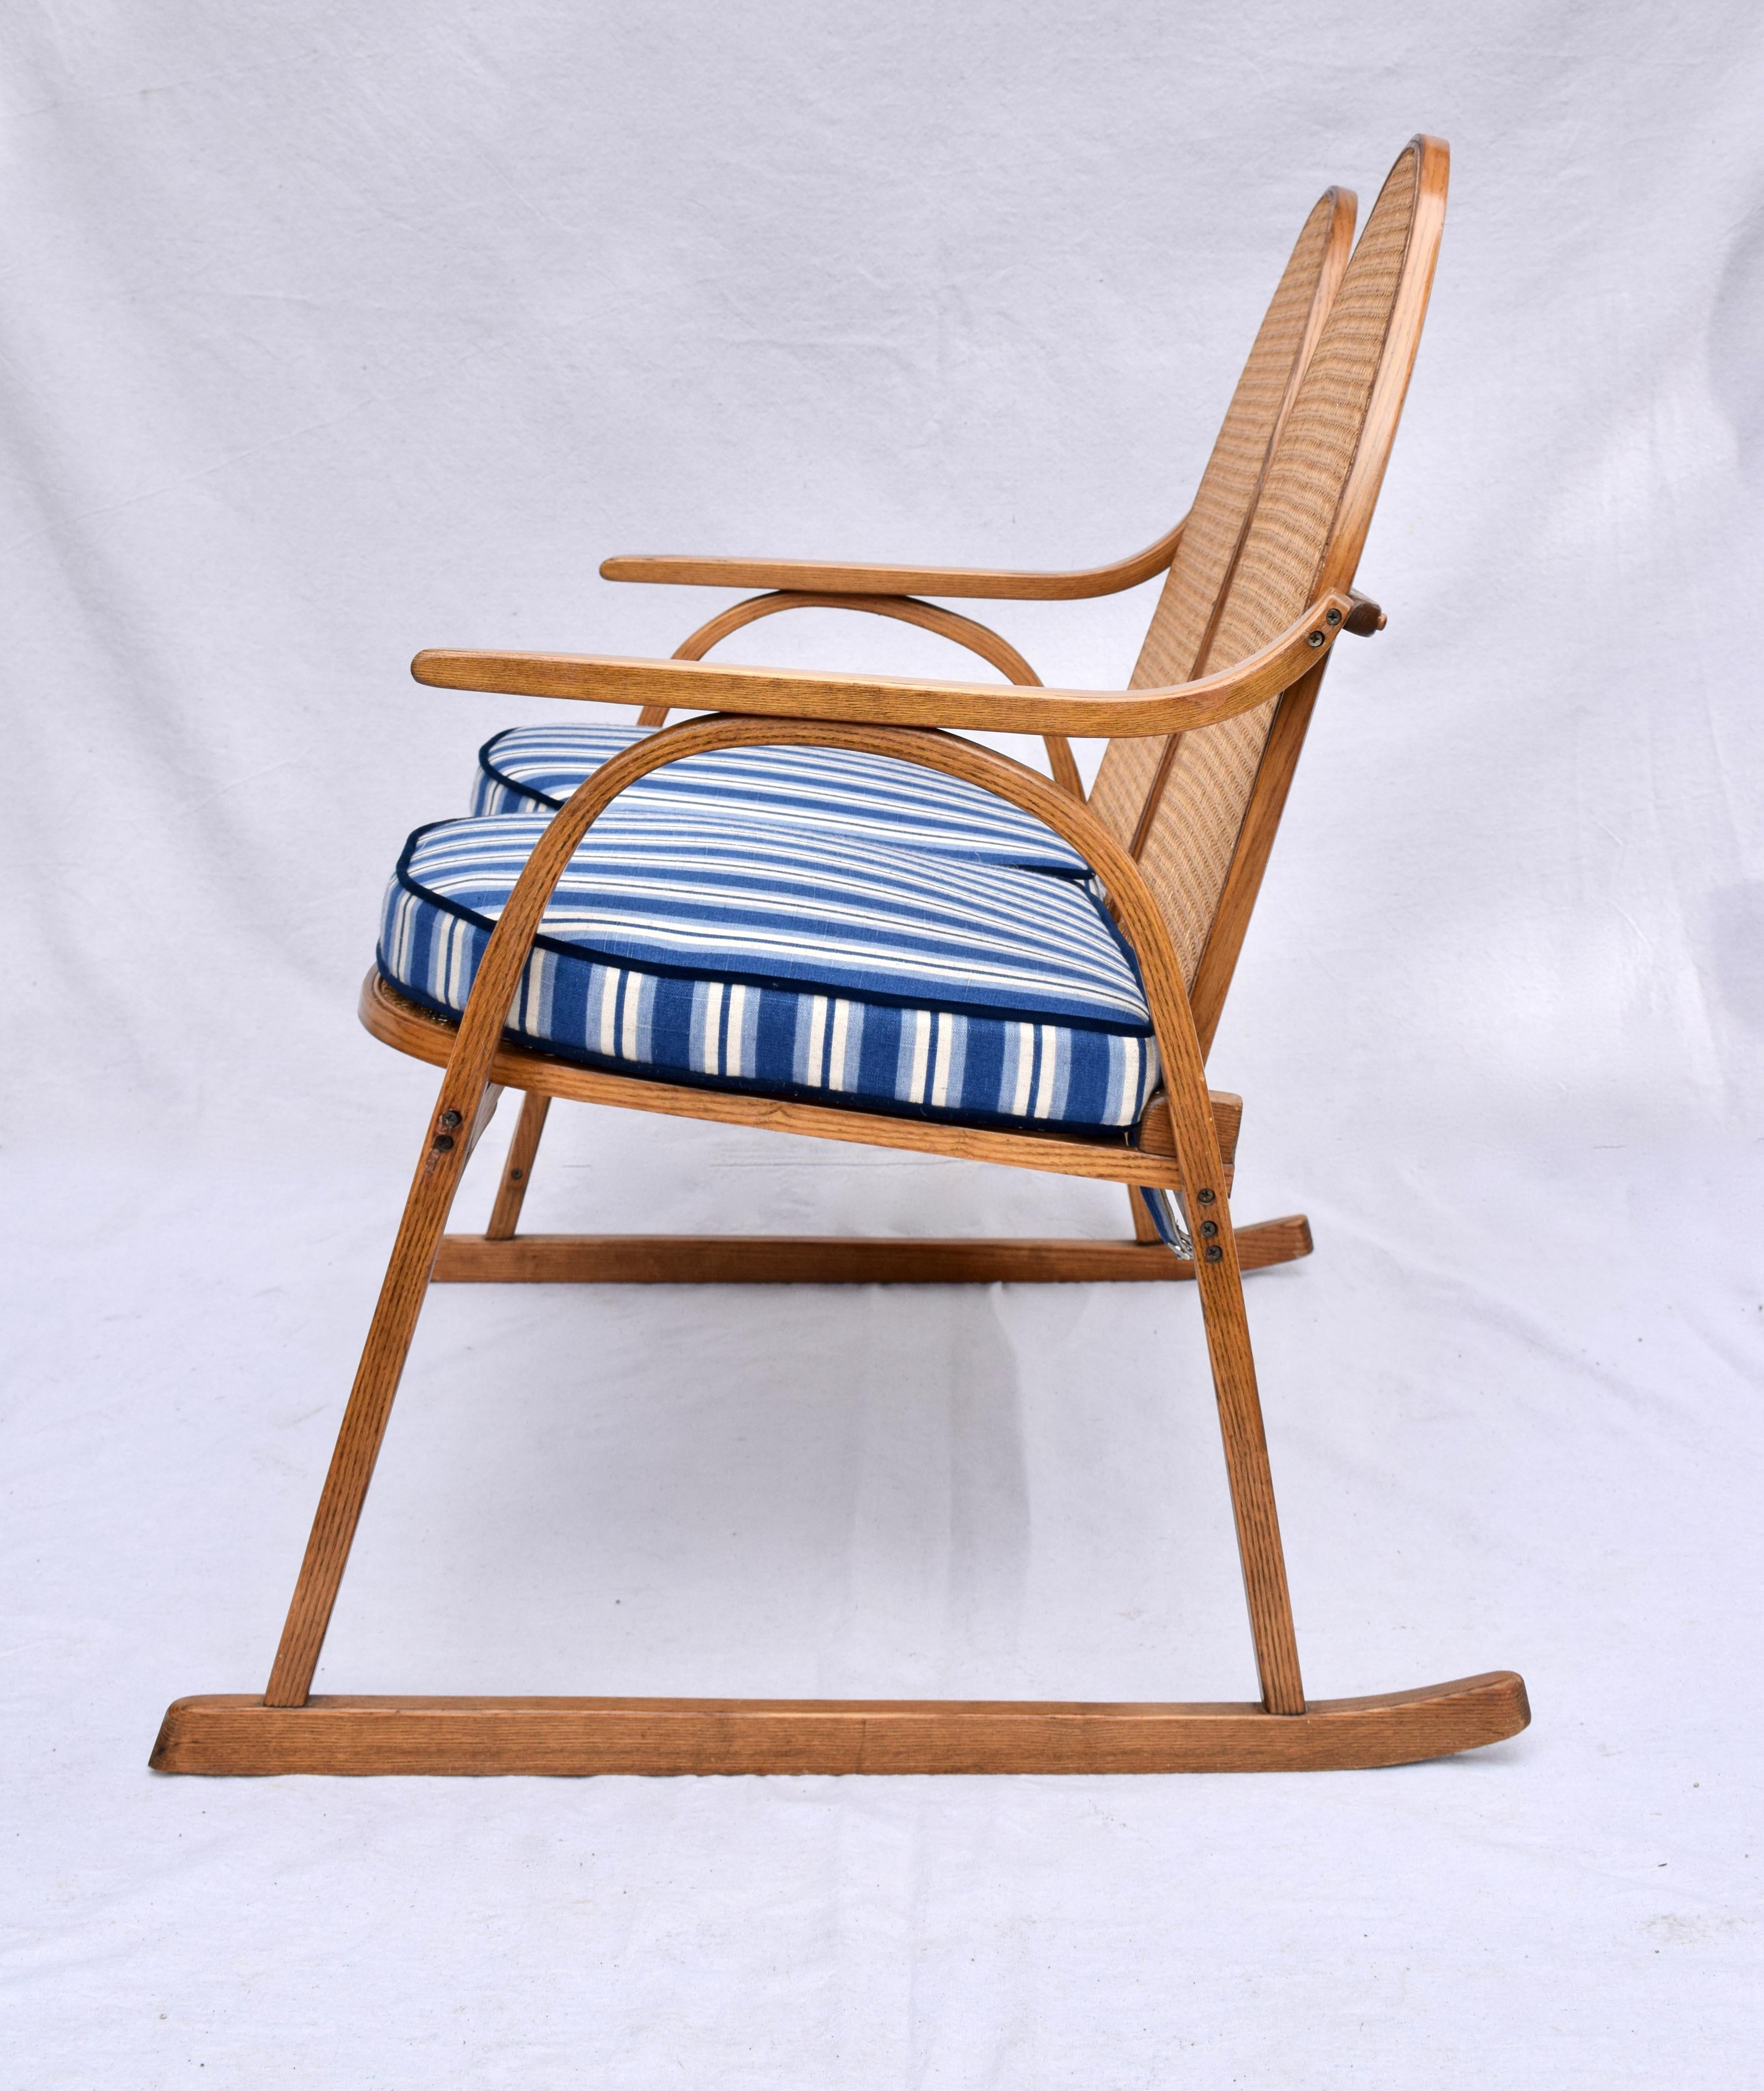 Adirondack Vermont Tubbs Caned Snowshoe Bench Settee